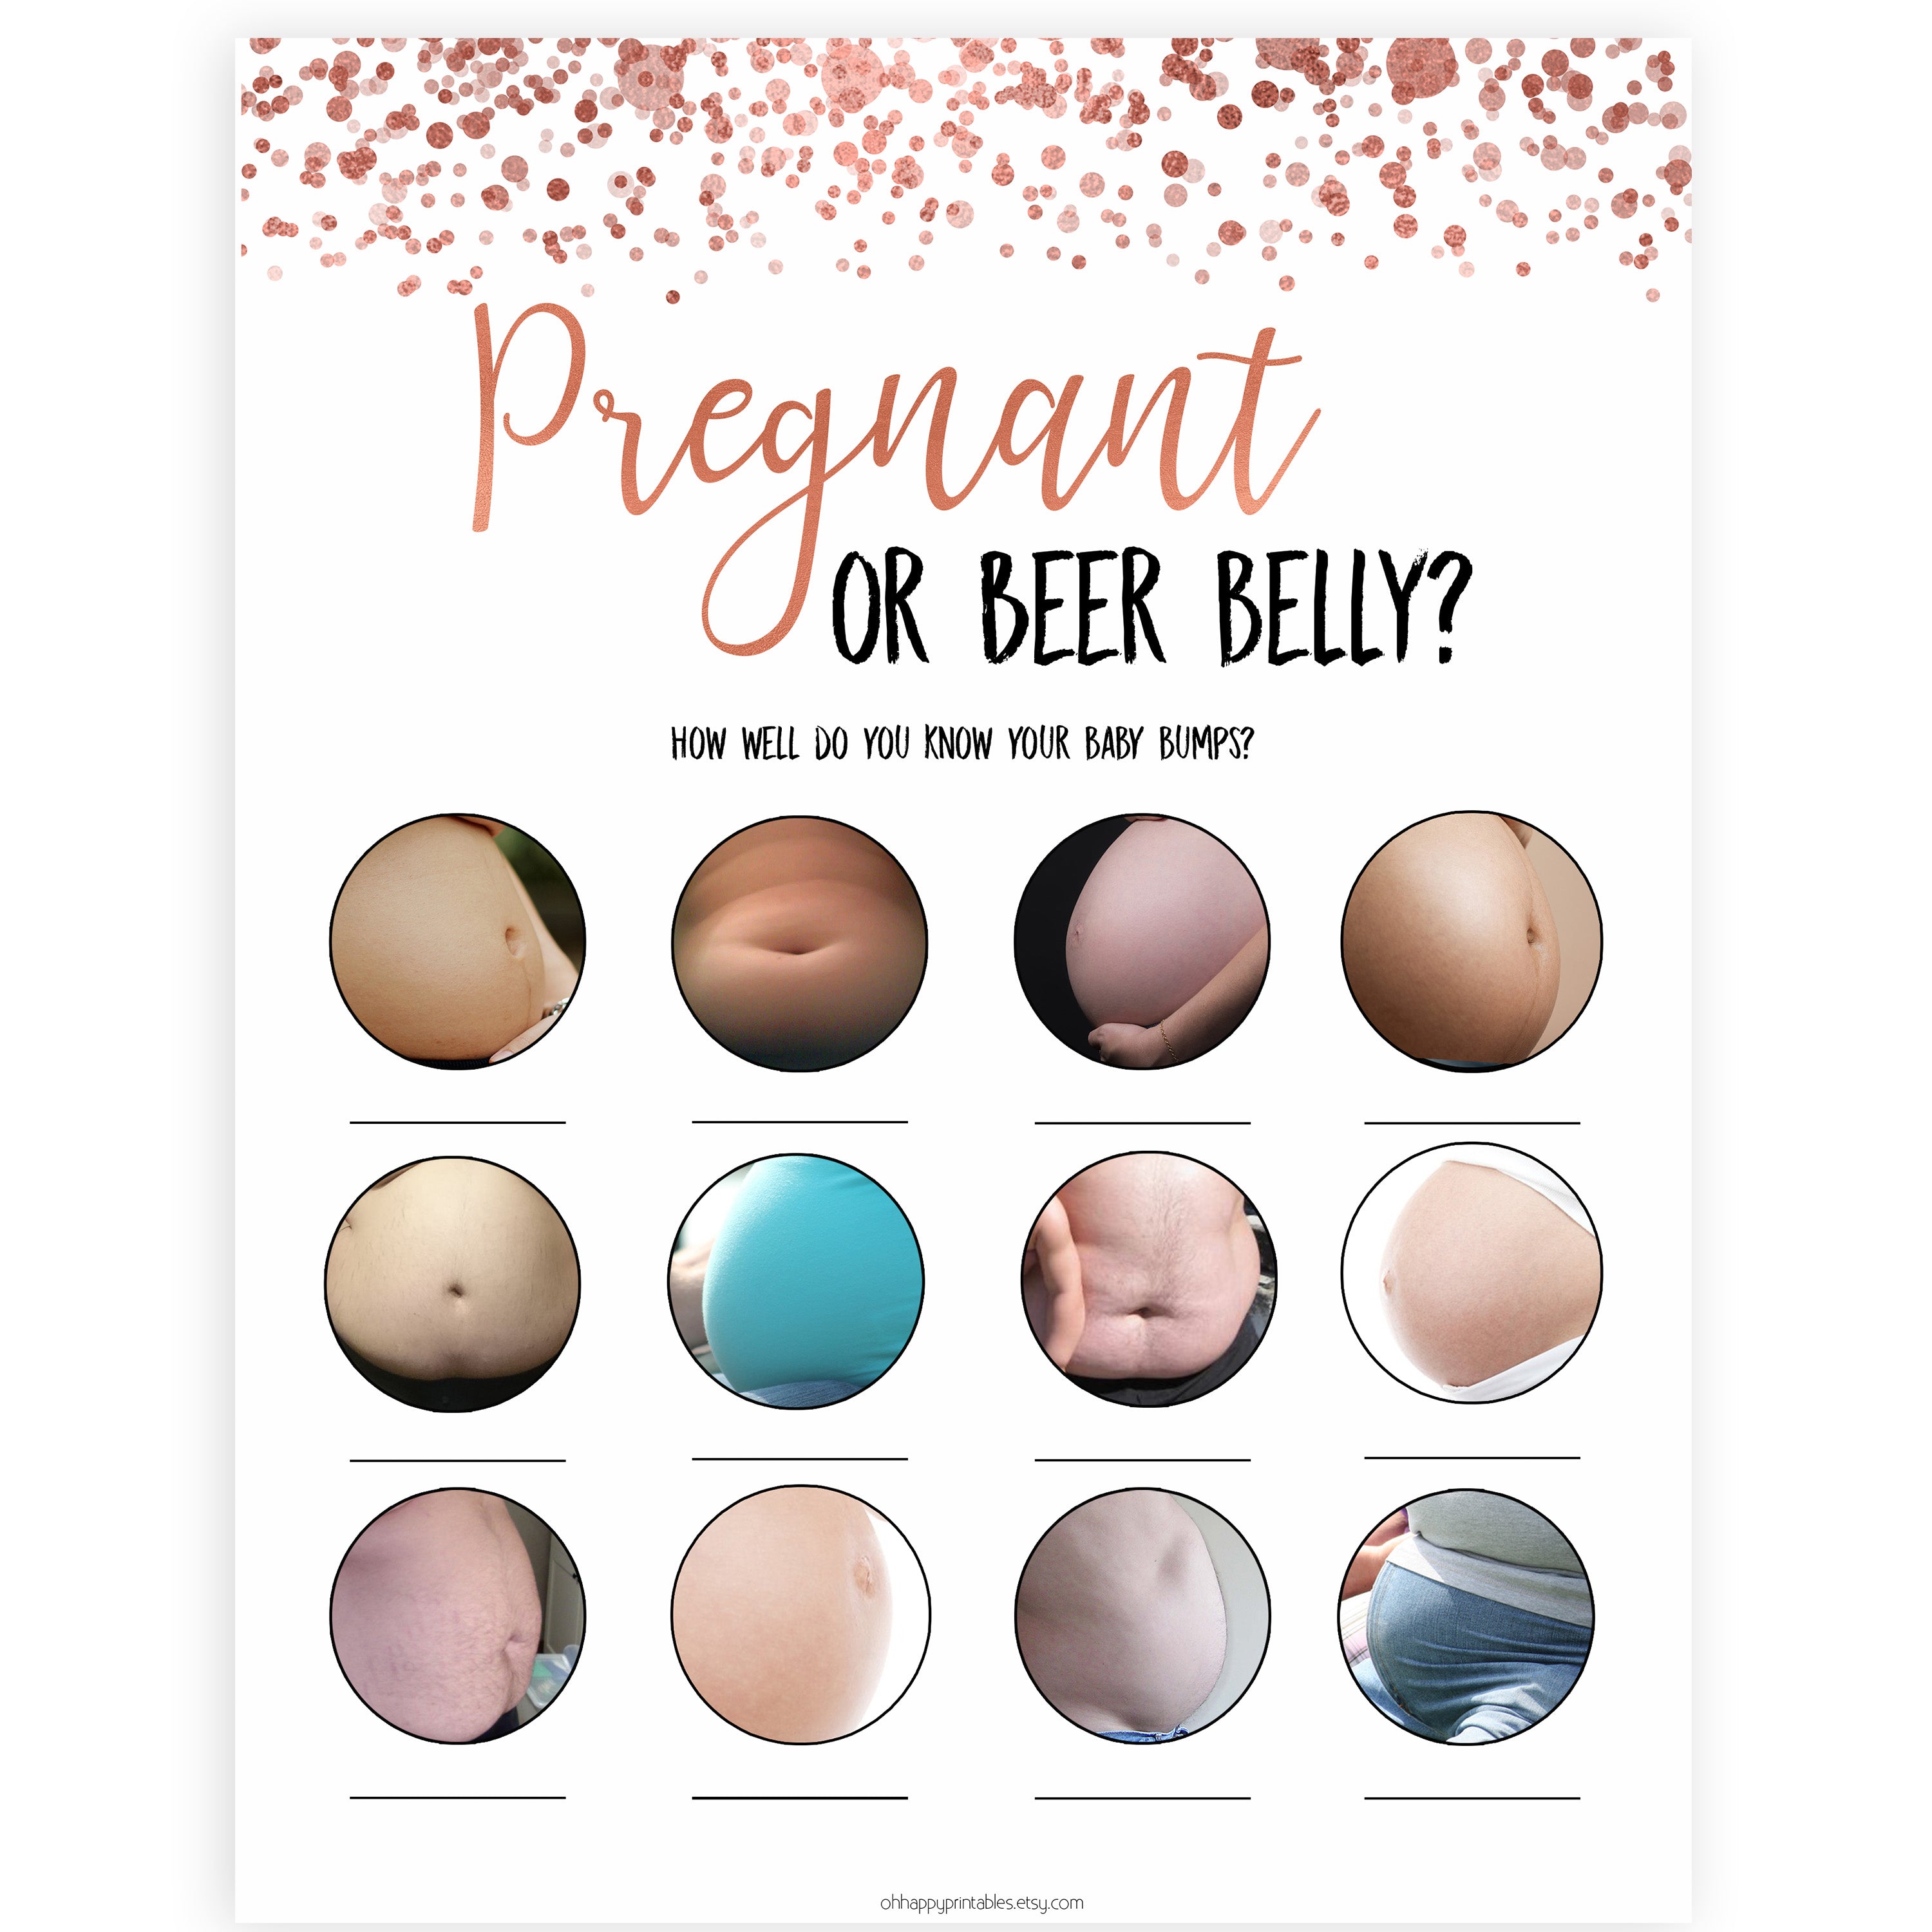 Pregnant or Beer Belly, Baby Shower Games, Baby Bump Beer Belly, Pregnant or Beer Belly Game, Beer Belly Pregnant, Rose Gold, Baby Games, printable baby shower games, fun baby shower games, popular baby shower games